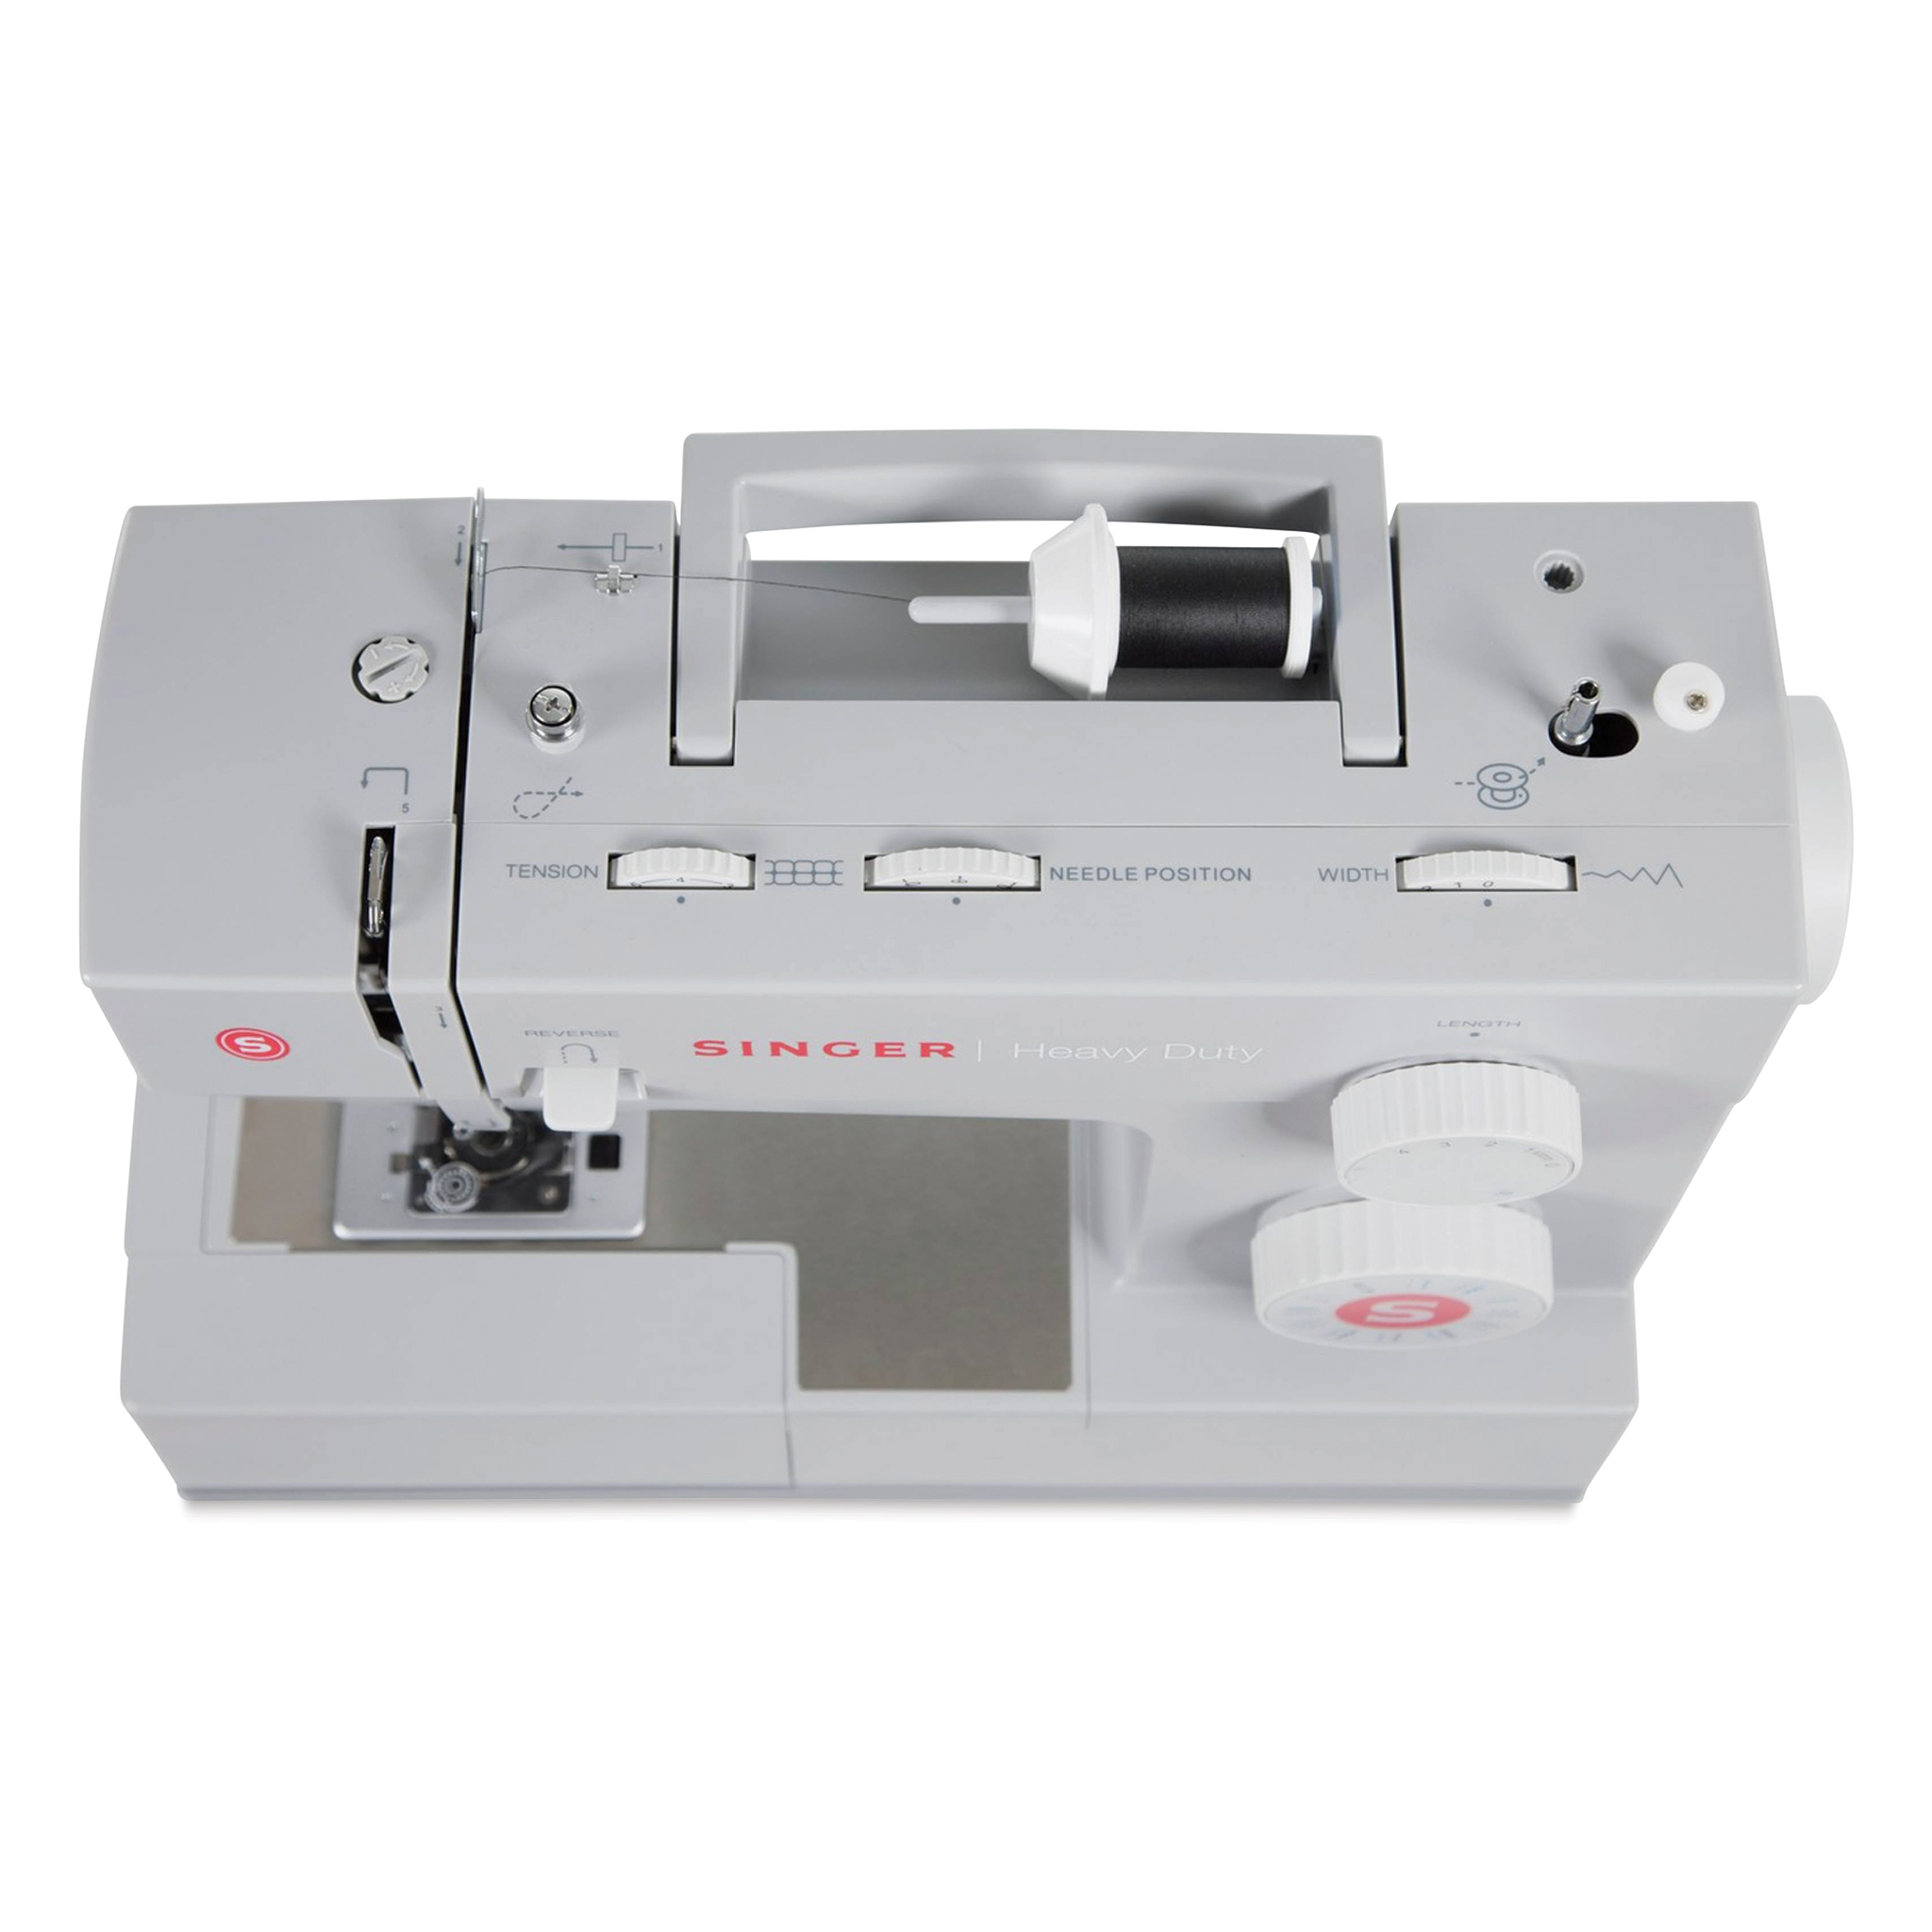 SINGER Heavy Duty 4423 Sewing Machine - general for sale - by